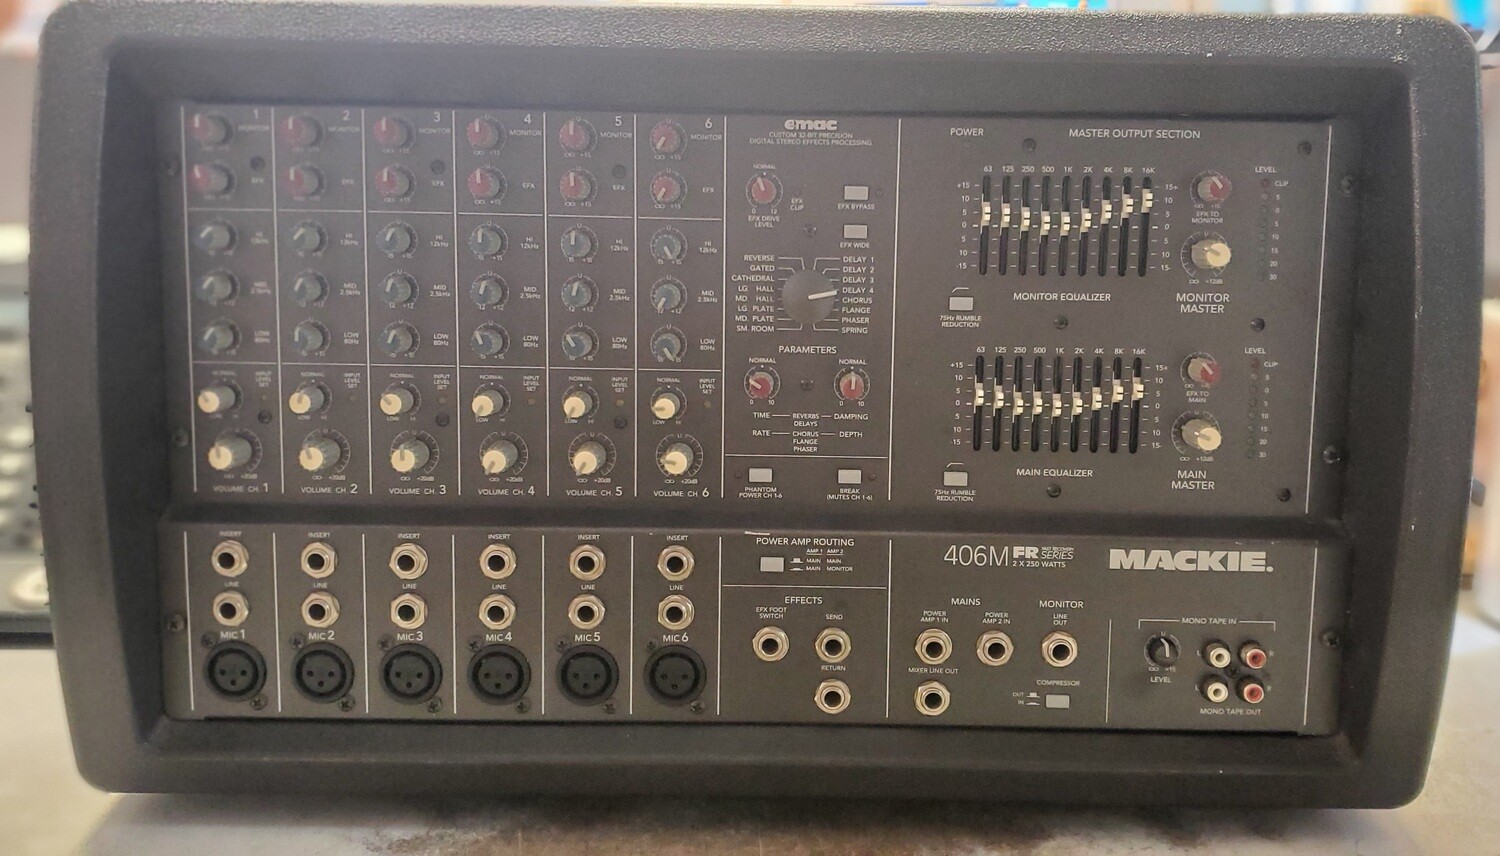 Mackie 406M FR Fast Recovery series mixer 2X 250 watts